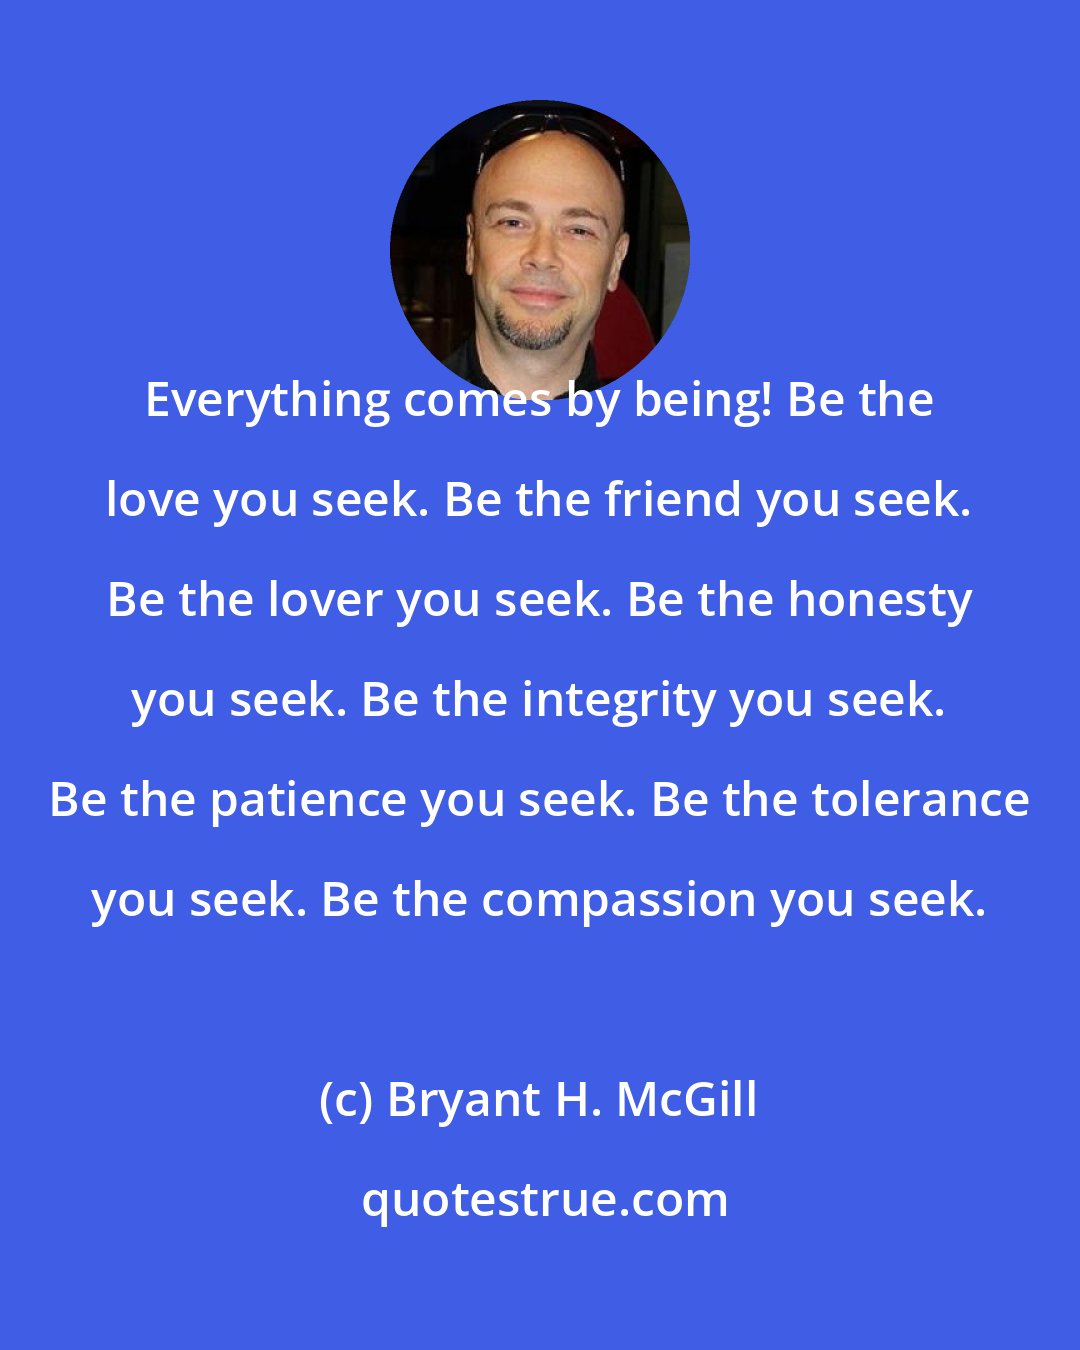 Bryant H. McGill: Everything comes by being! Be the love you seek. Be the friend you seek. Be the lover you seek. Be the honesty you seek. Be the integrity you seek. Be the patience you seek. Be the tolerance you seek. Be the compassion you seek.